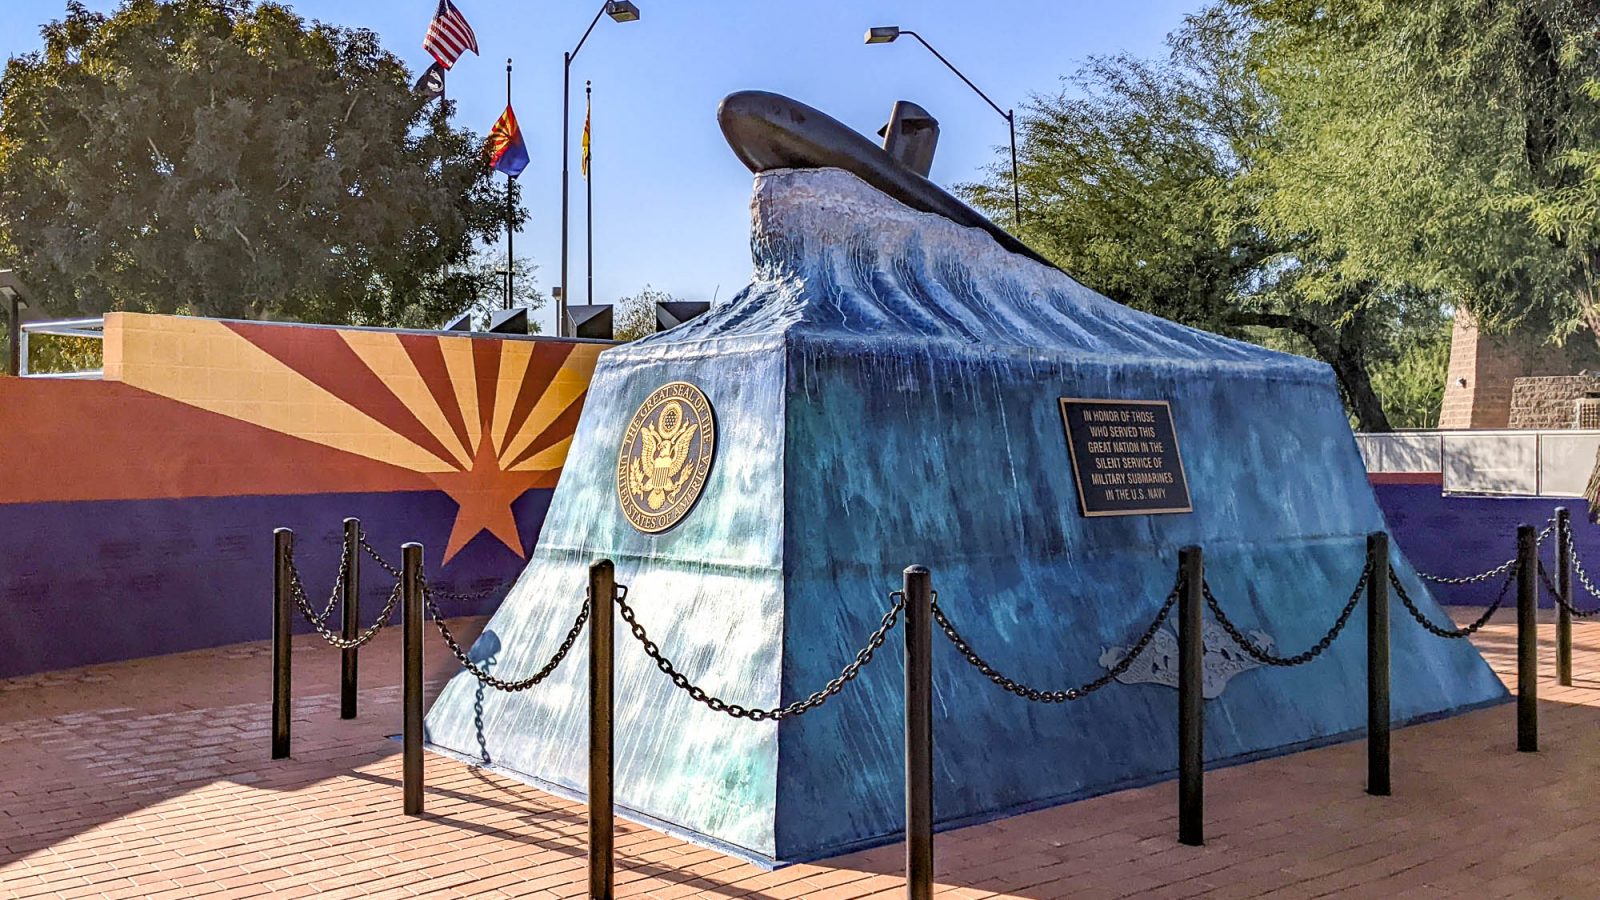 blue monument that looks like an ocean wave with a submarine on top in front of wall painted like arizona flag